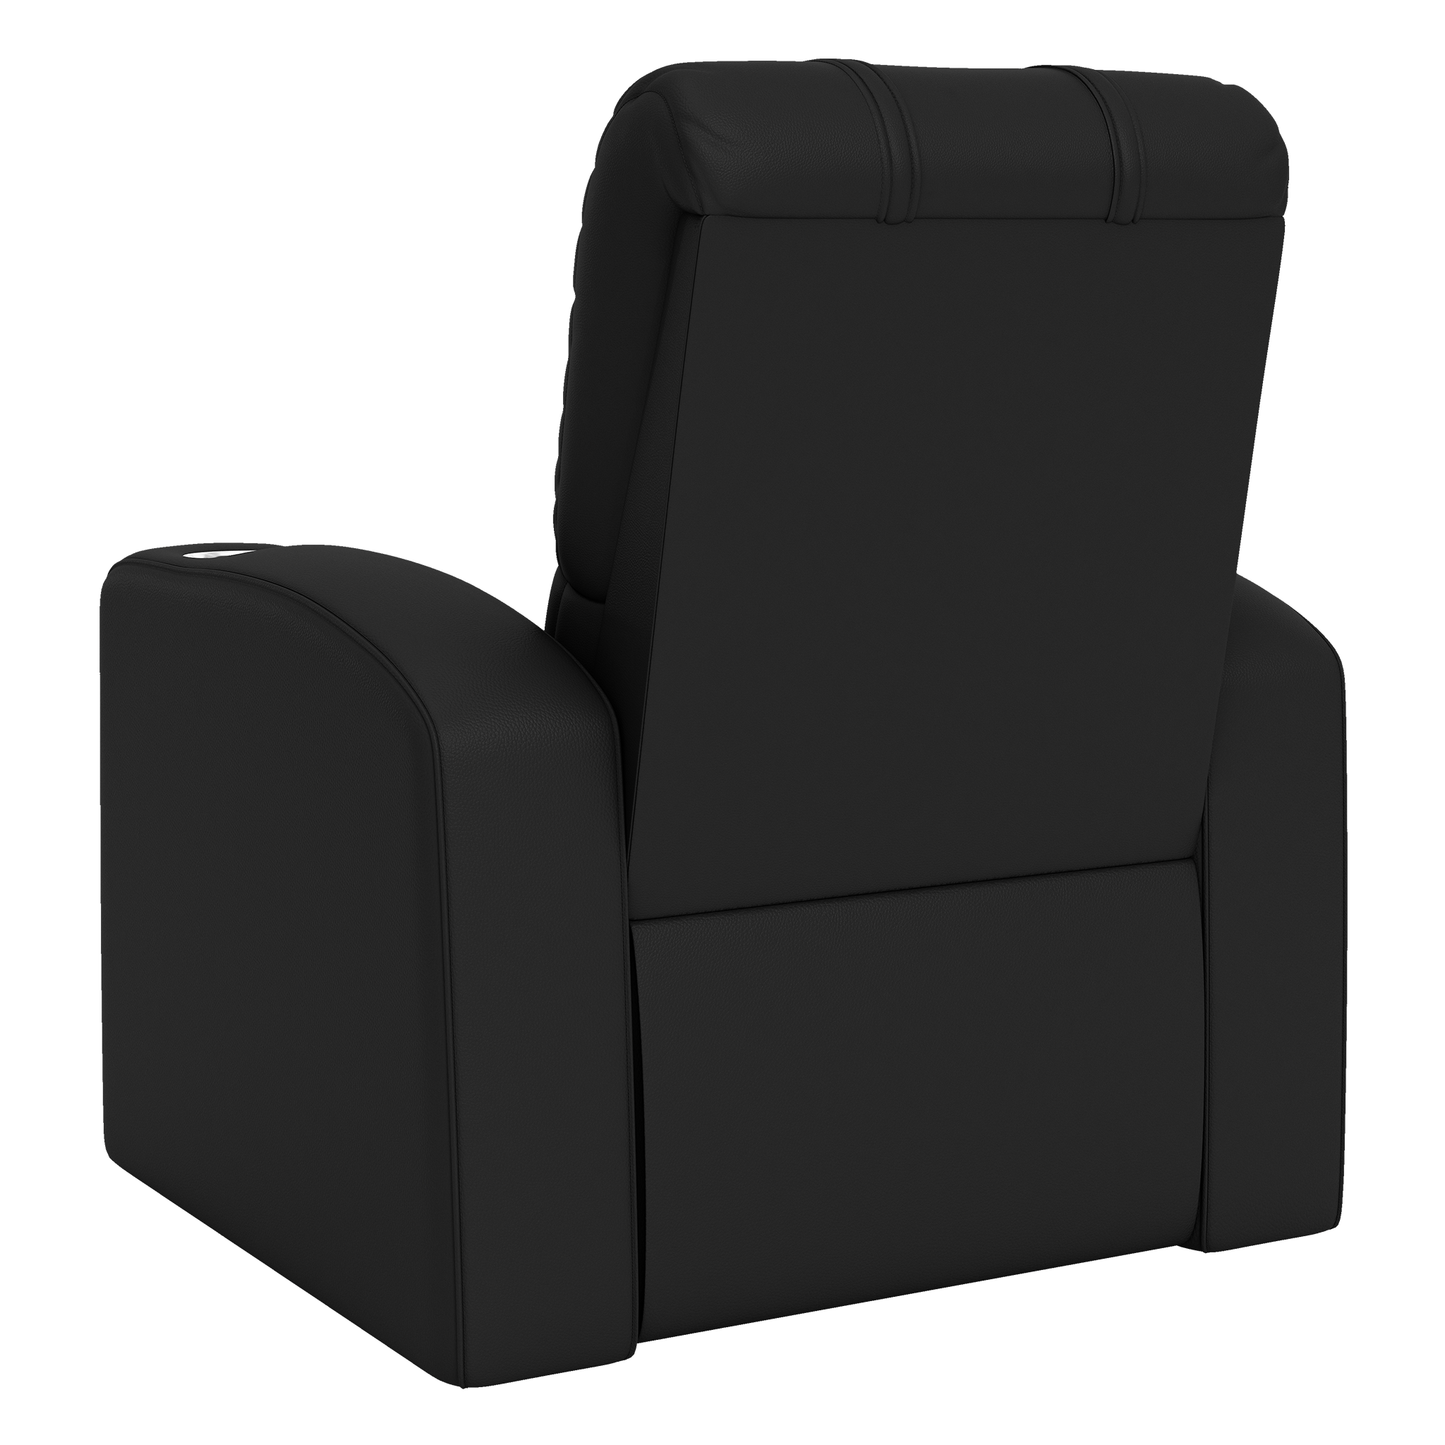 Relax Home Theater Recliner with Vanderbilt Commodores Secondary